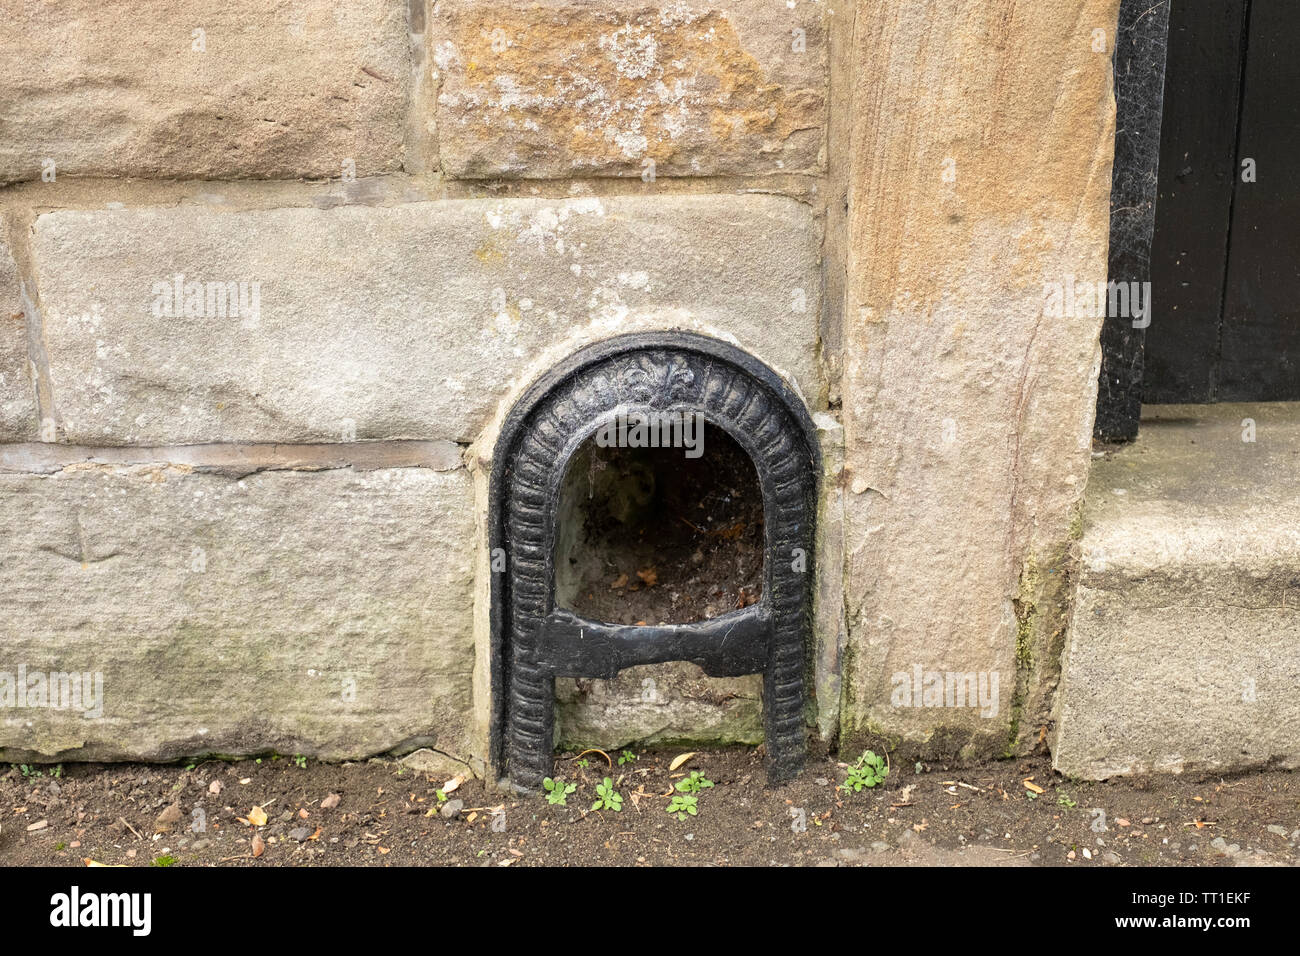 Traditional old boot scraper set in outside wall on street in the Victorian suburb of  Morningside, Edinburgh, Scotland, UK. Stock Photo